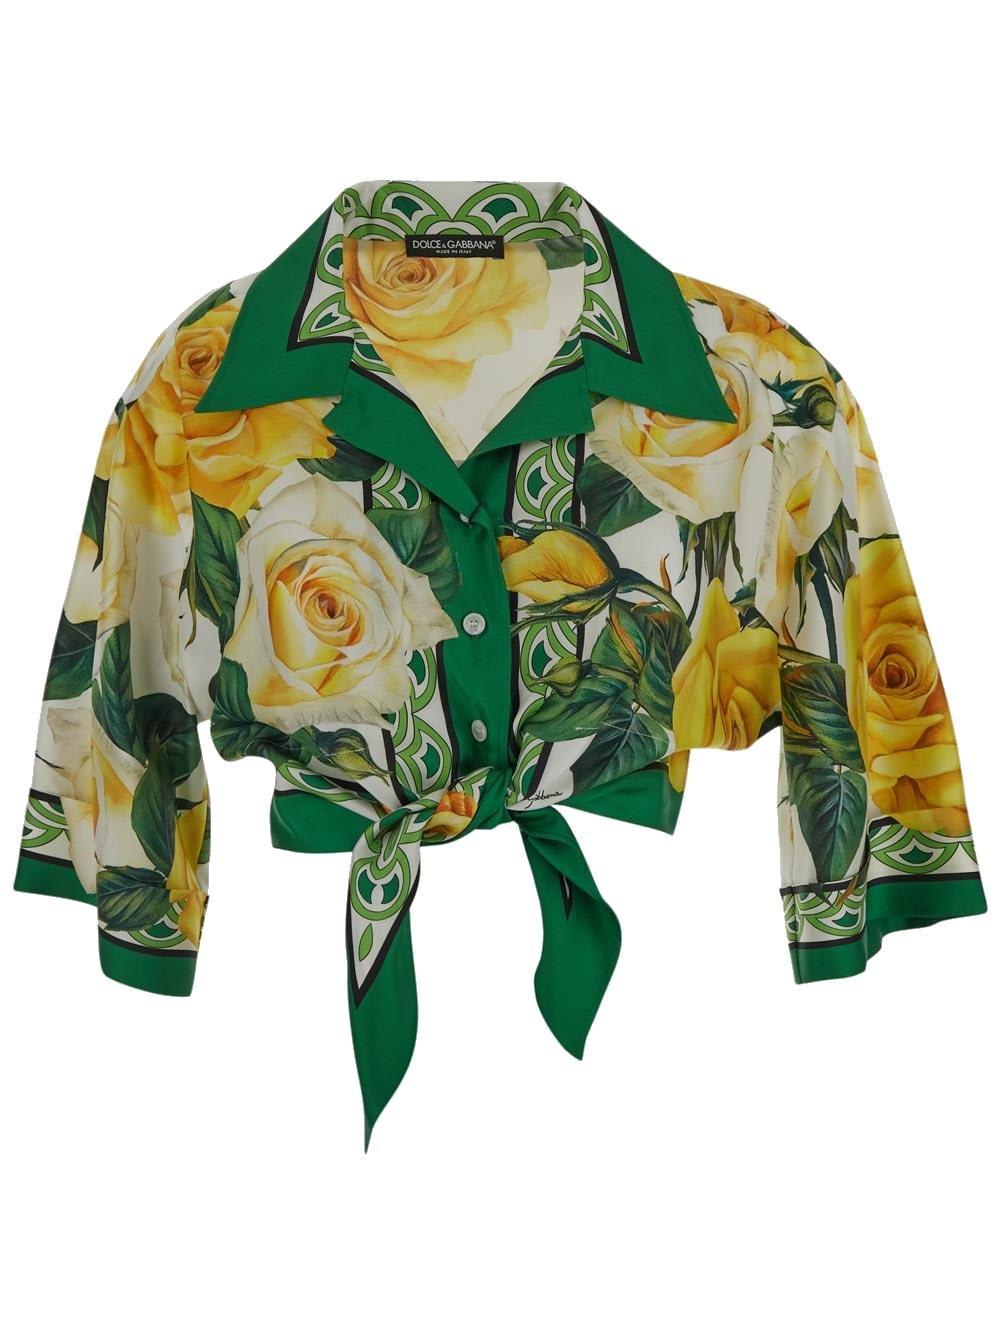 DOLCE & GABBANA FLORAL PRINTED TIE FASTENED SHIRT